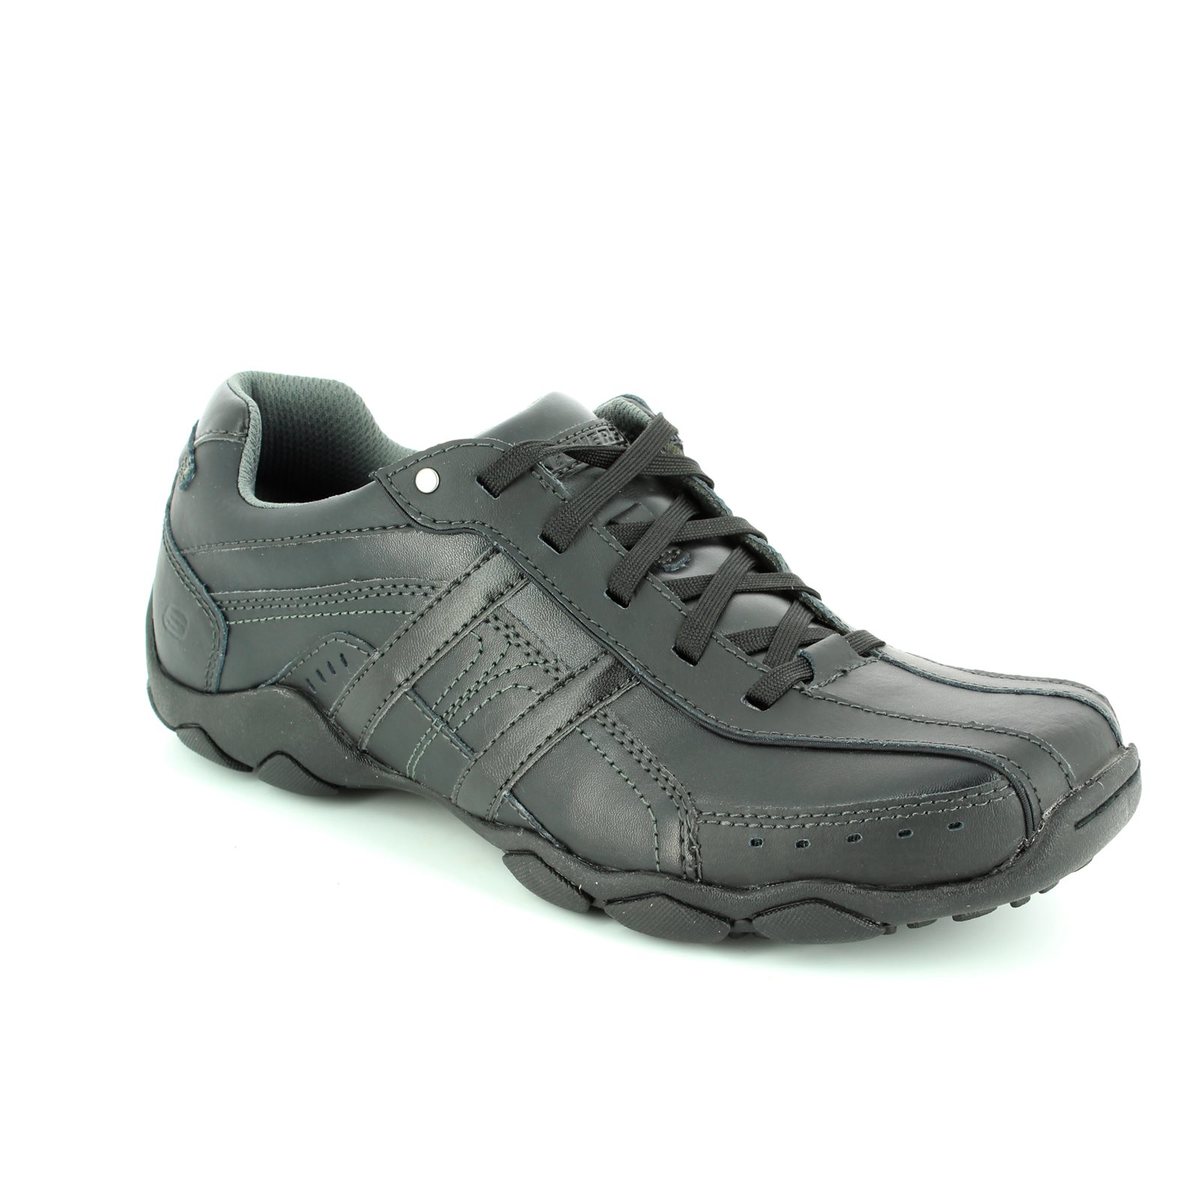 skechers black casual shoes